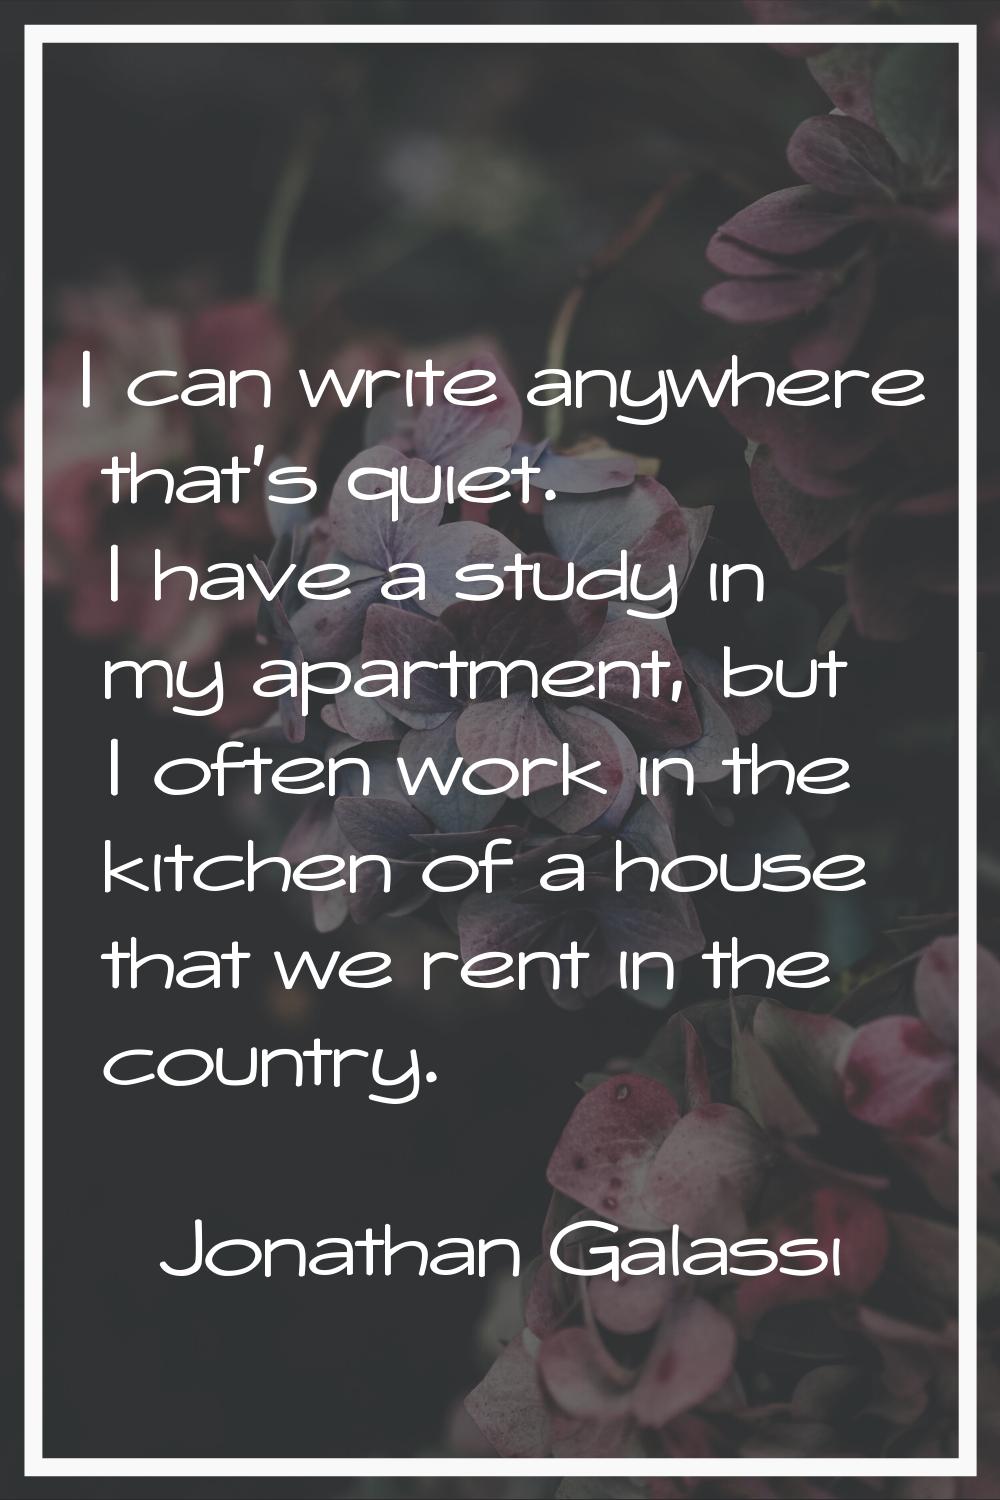 I can write anywhere that's quiet. I have a study in my apartment, but I often work in the kitchen 